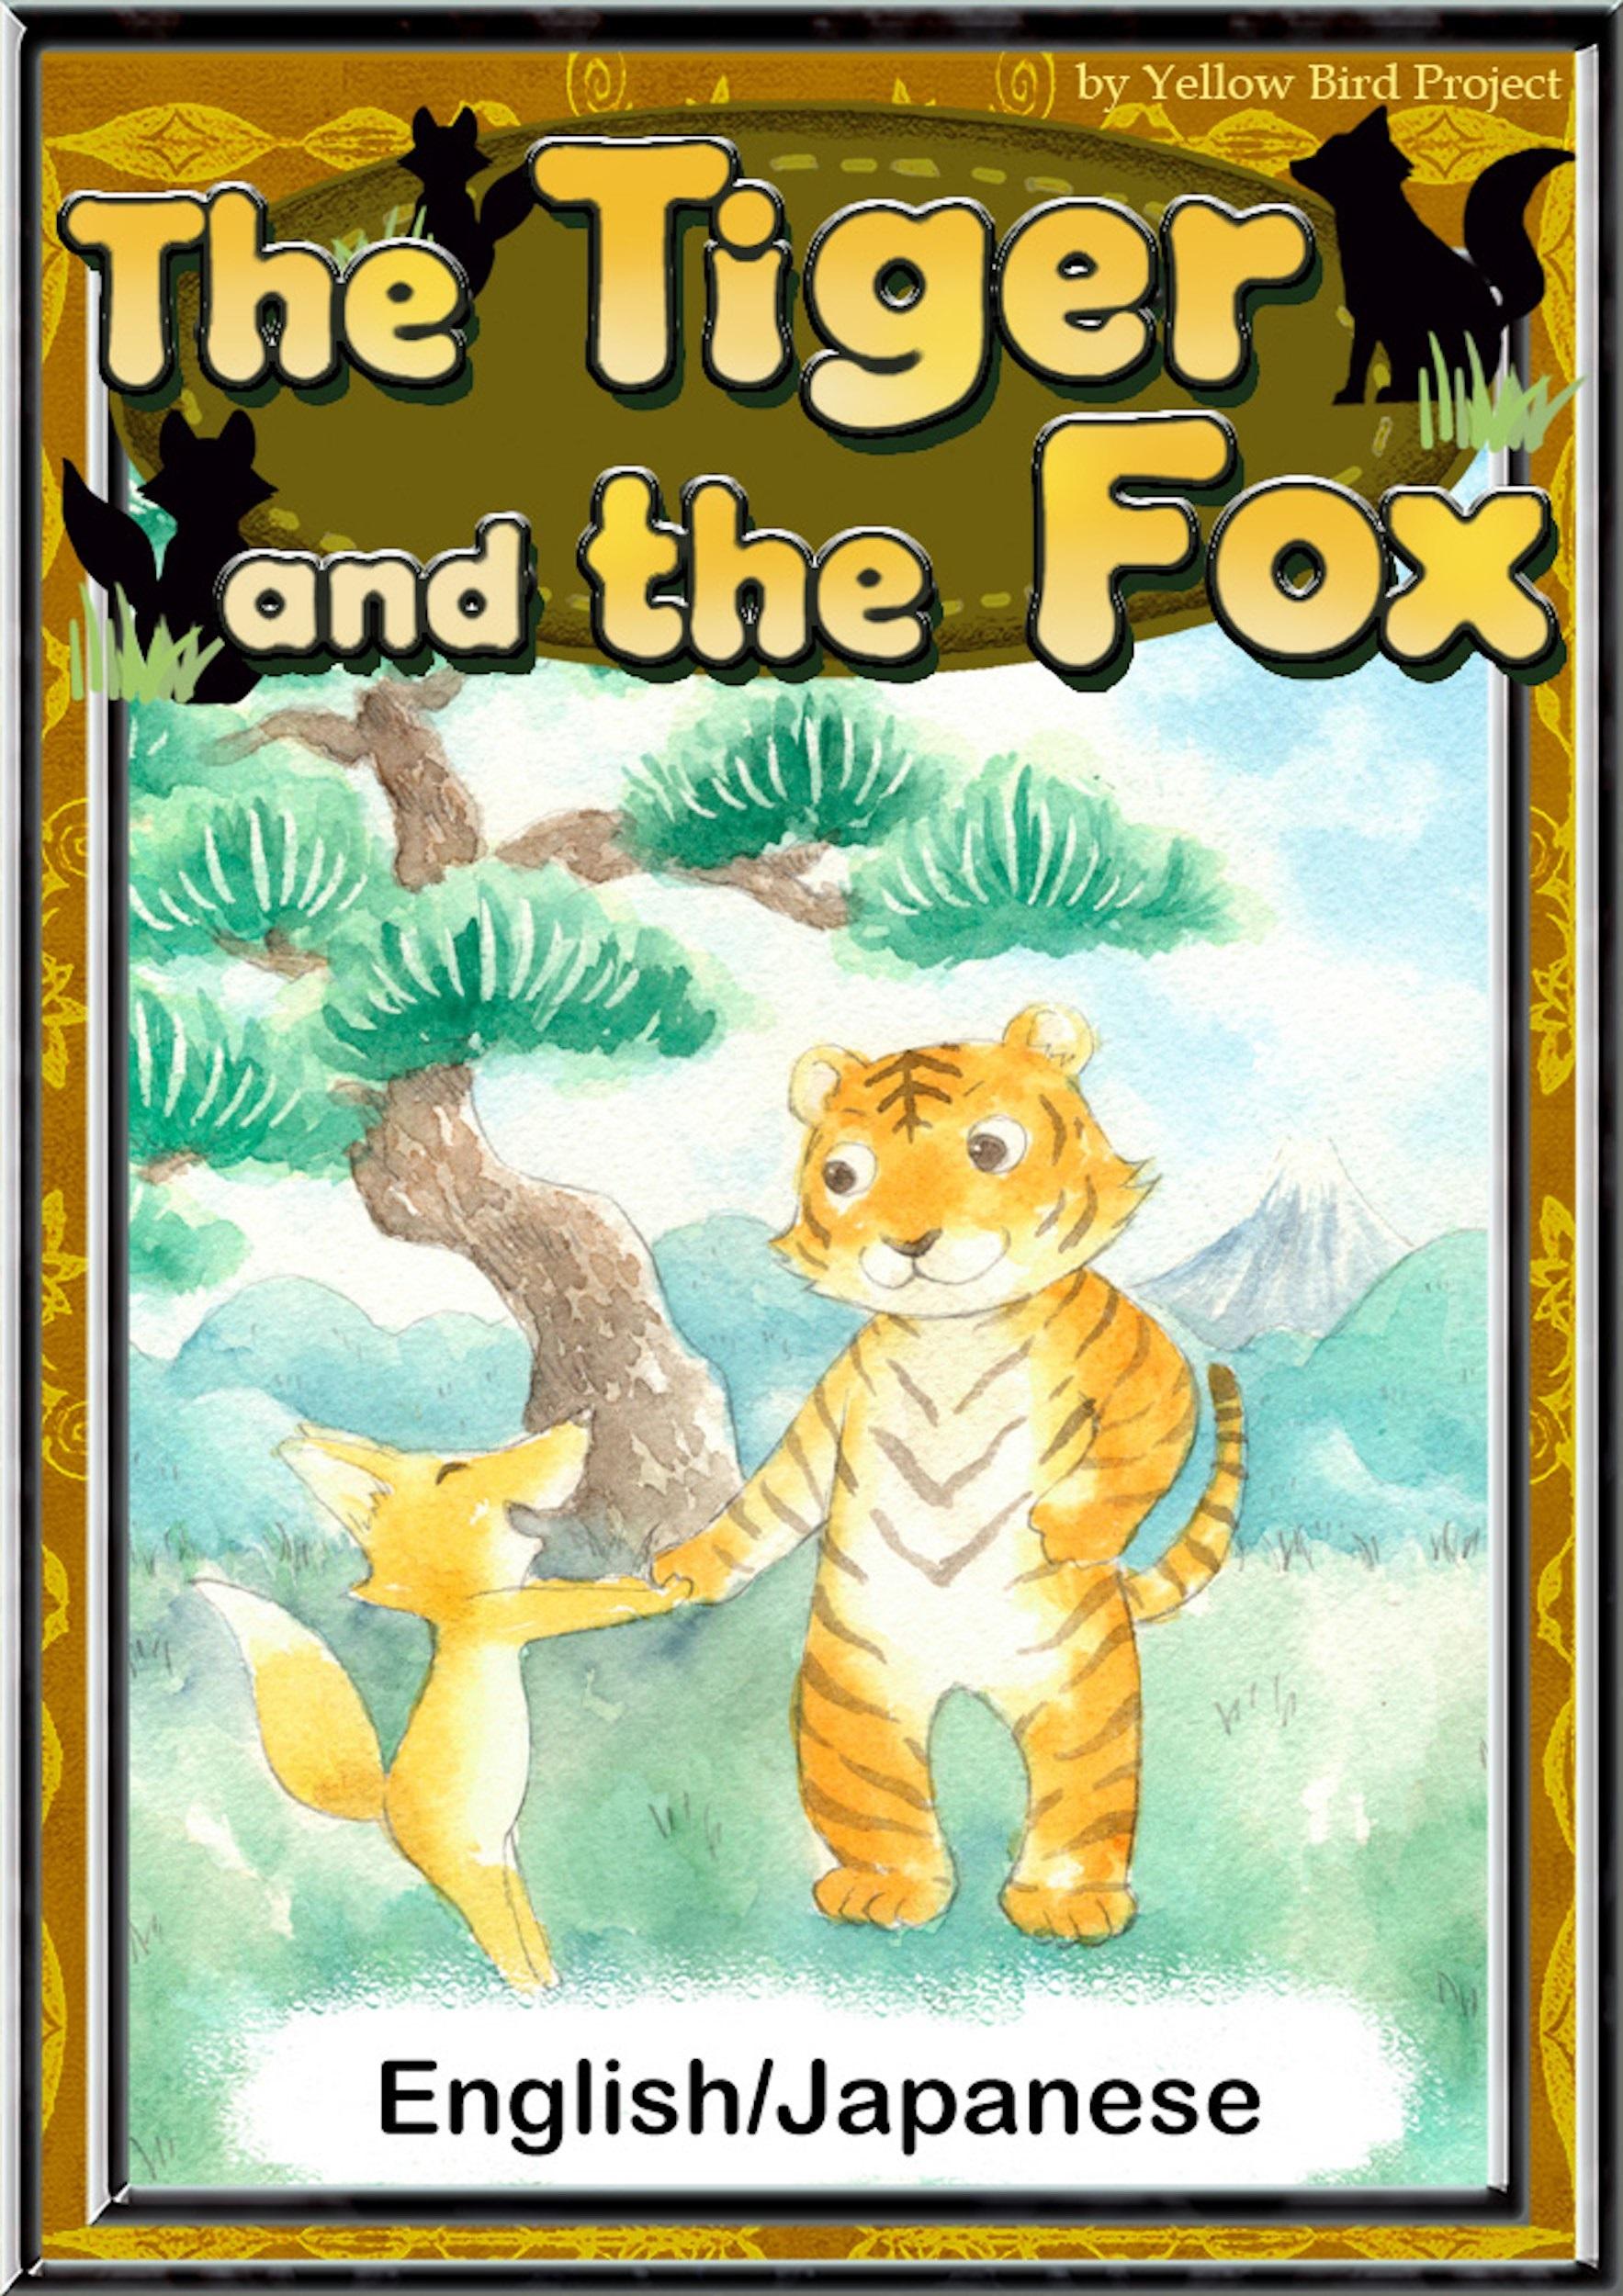 The Tiger and the Fox　【English/Japanese versions】